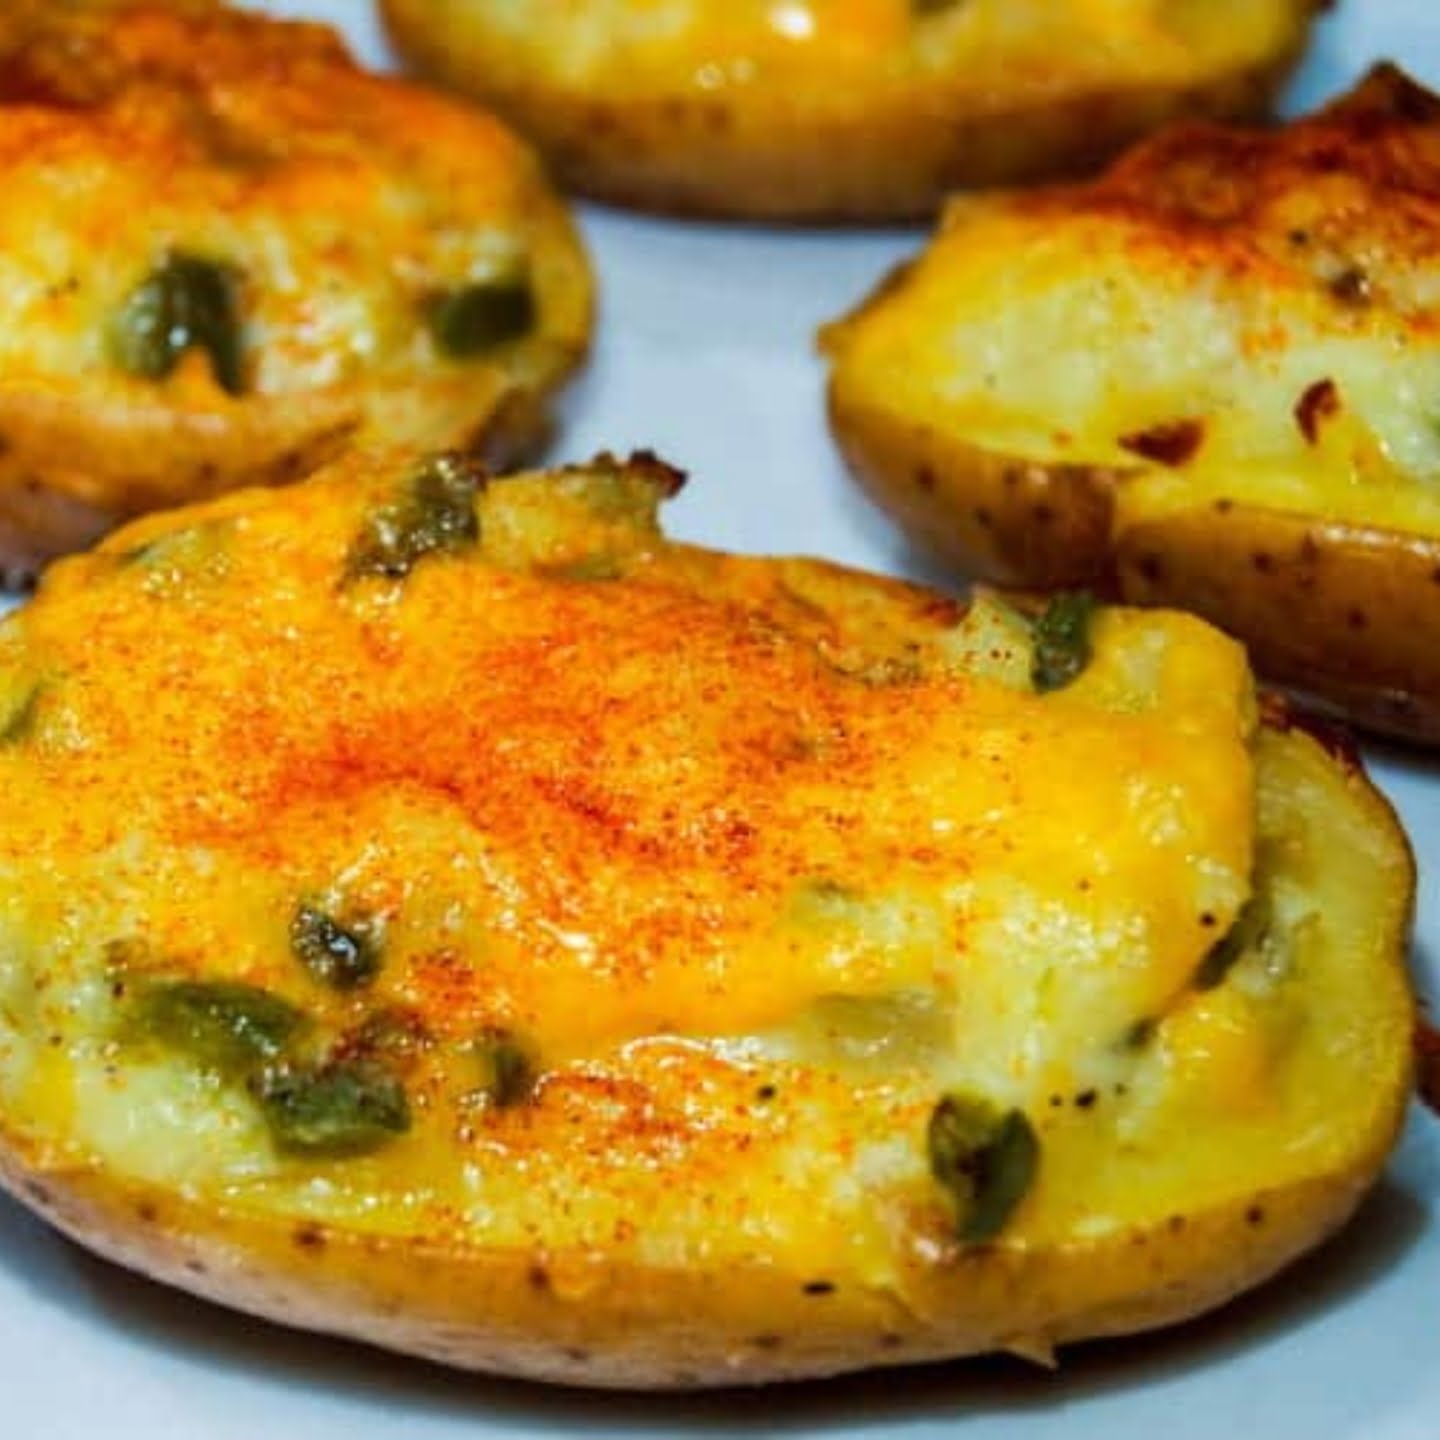 Twice baked potatoes featured